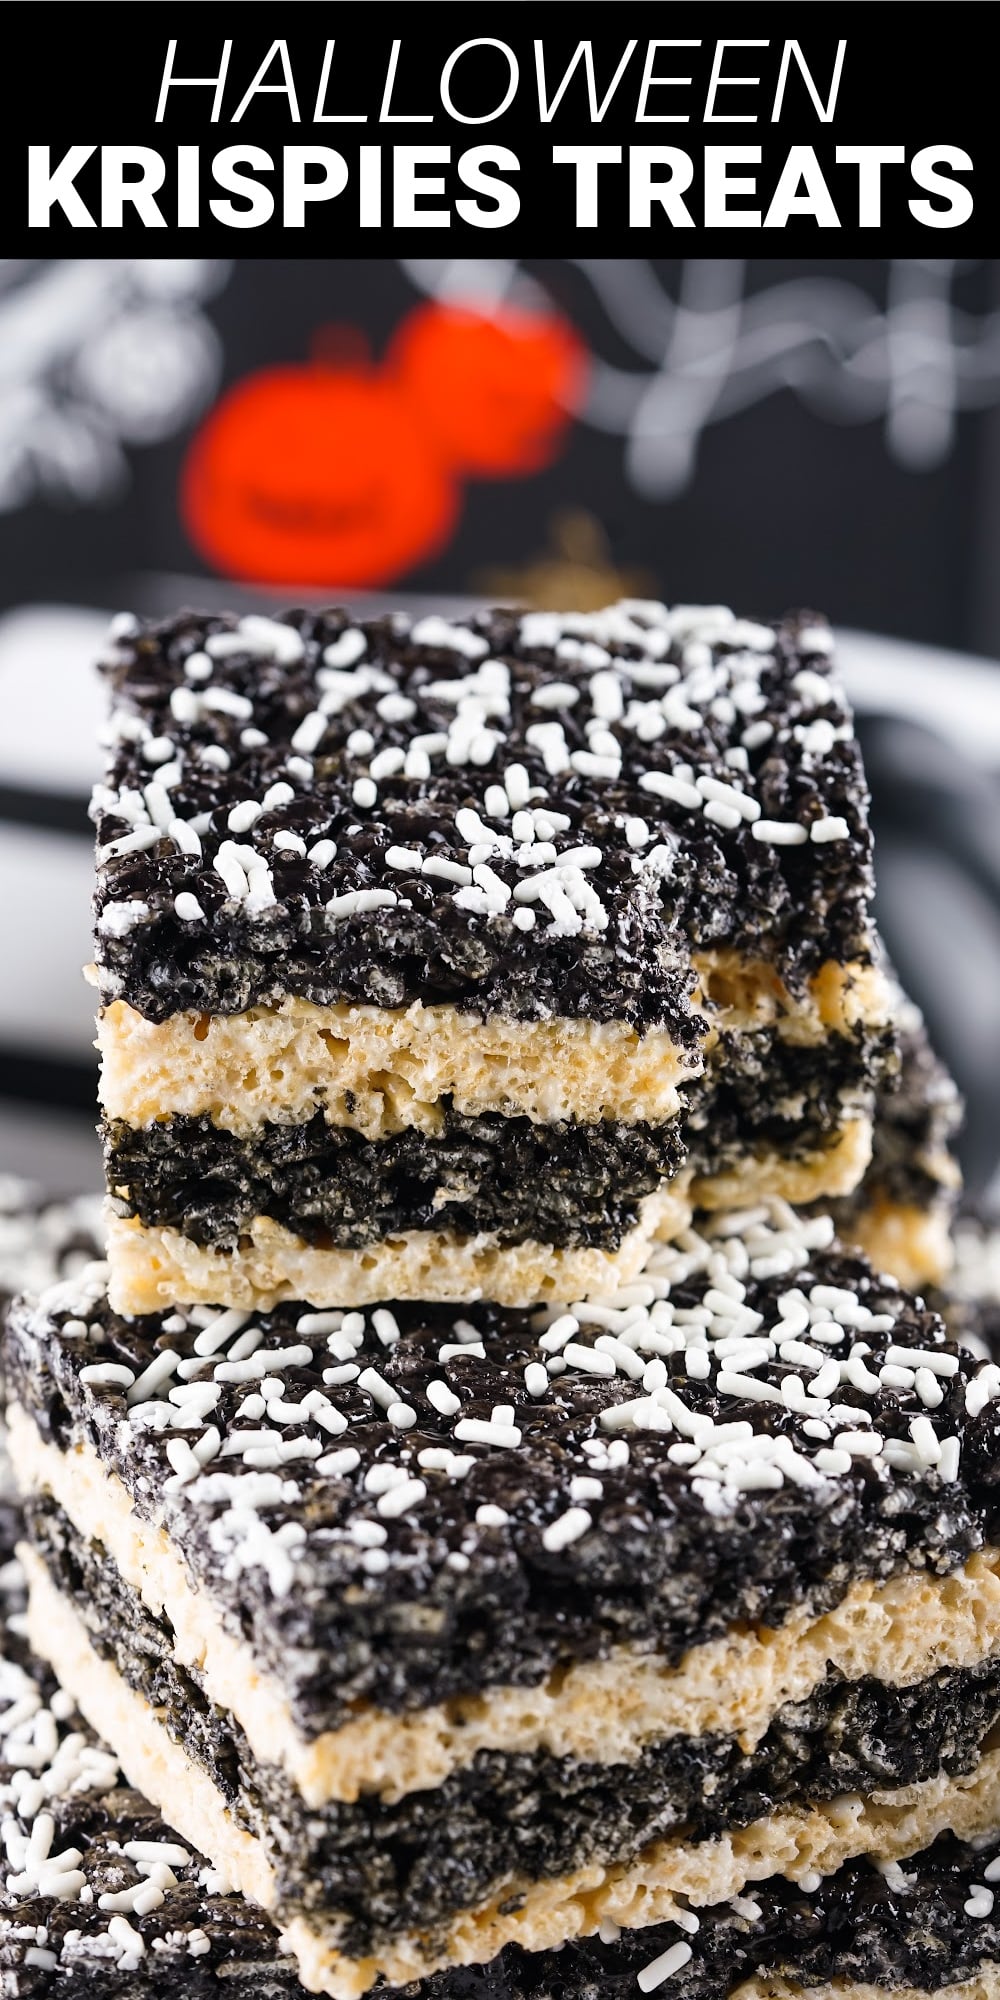 These Halloween Rice Krispie treats give the classic party dessert a fun Halloween makeover. They have the same buttery marshmallow taste and perfect chewy texture that everyone knows and loves, with a bold layered look that makes them a perfect choice for Halloween.